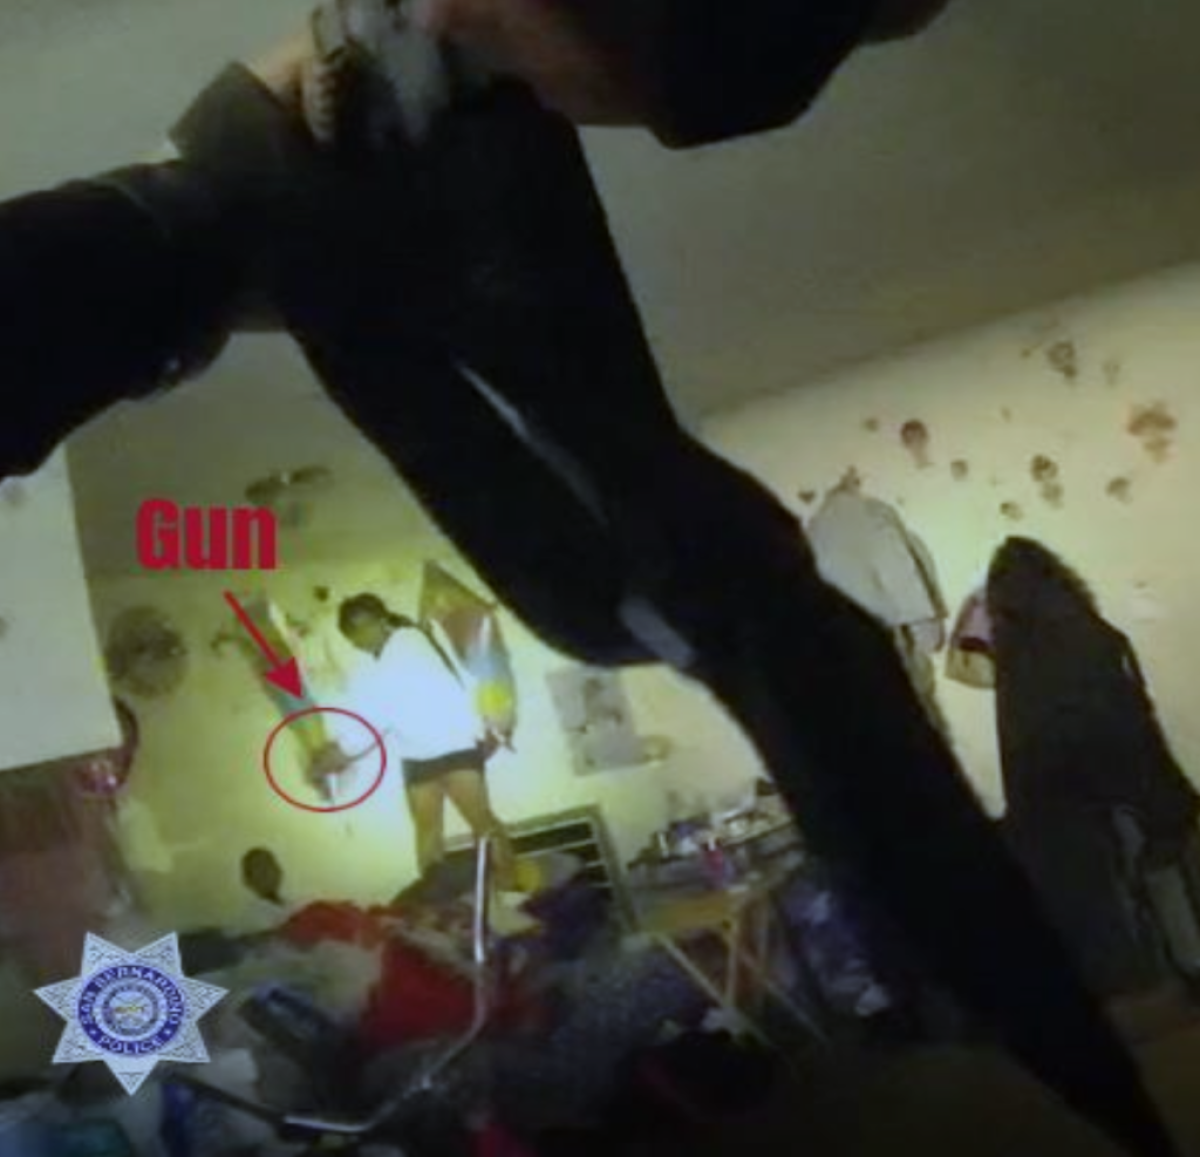 A still from video shows an officer's hands aiming a gun at a woman who is holding what's labeled as a gun.